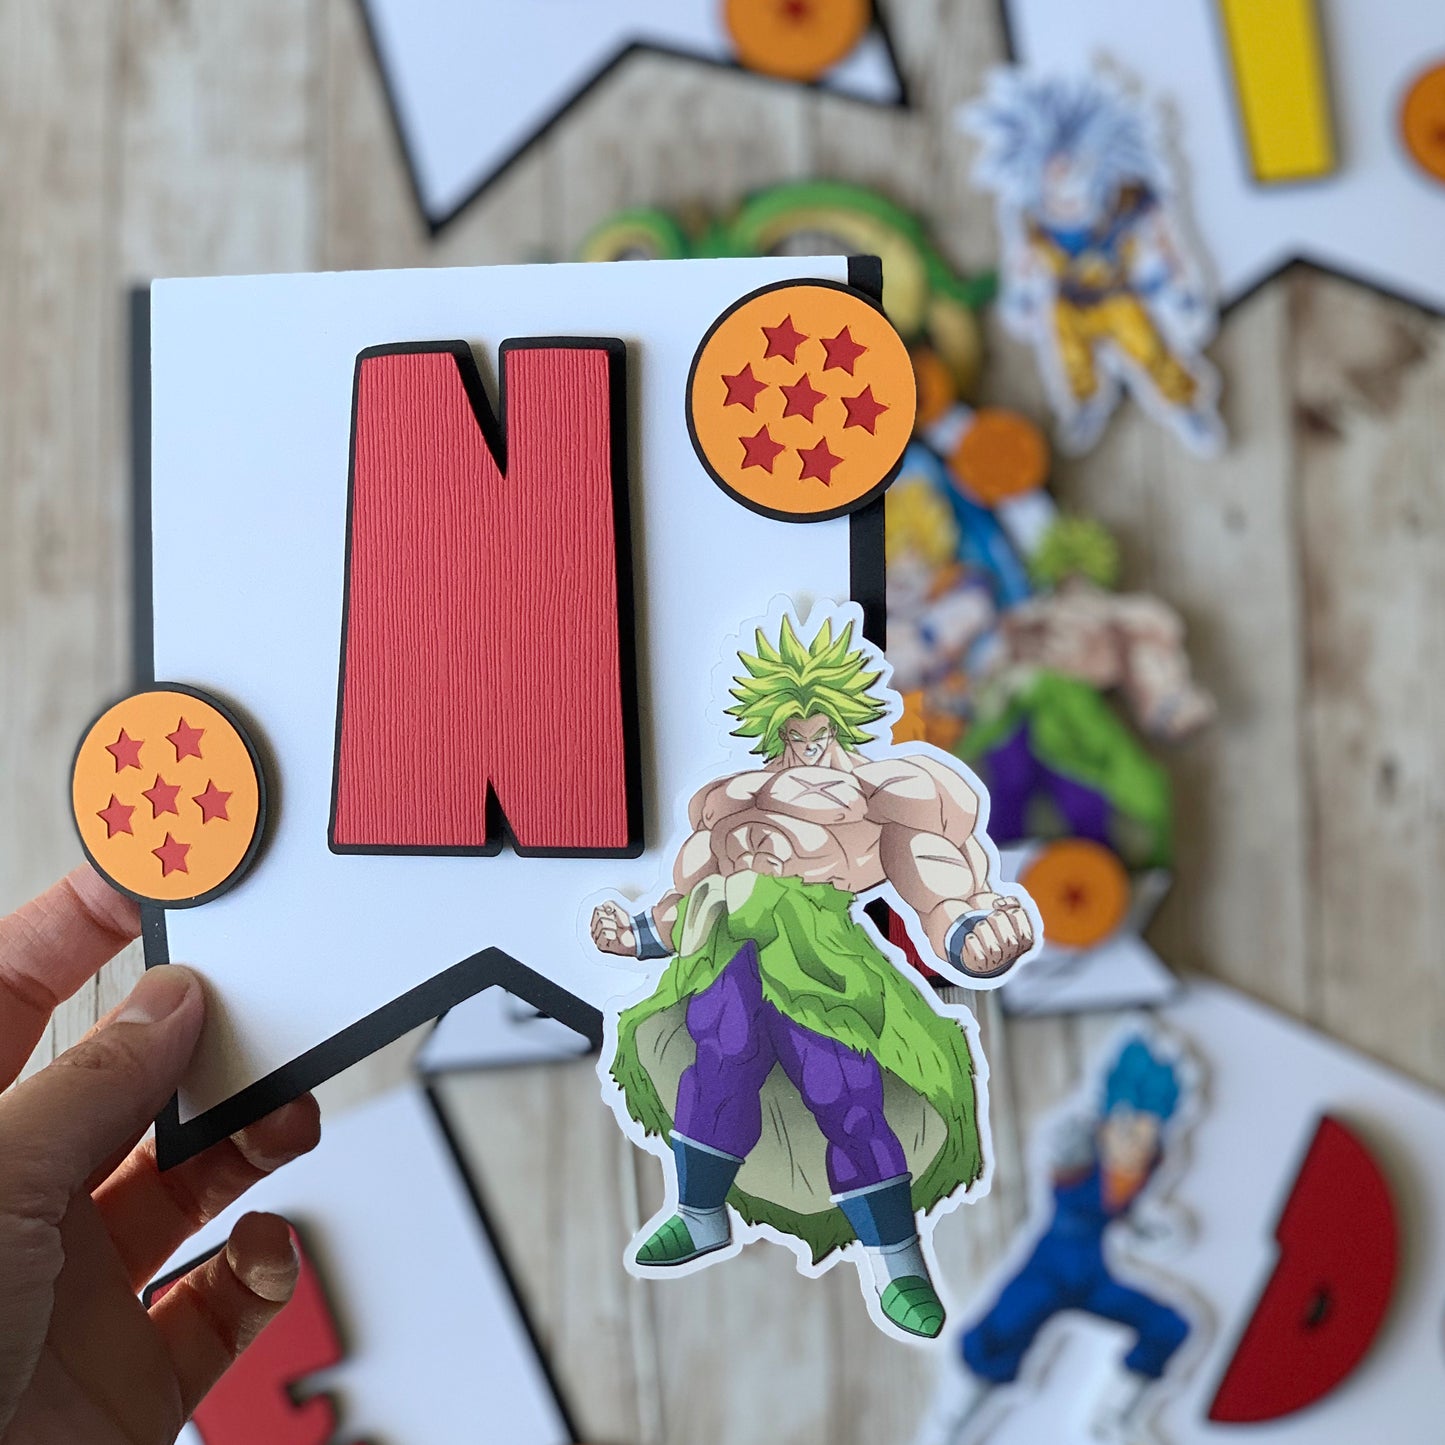 Dragon Ball Z themed party decorations